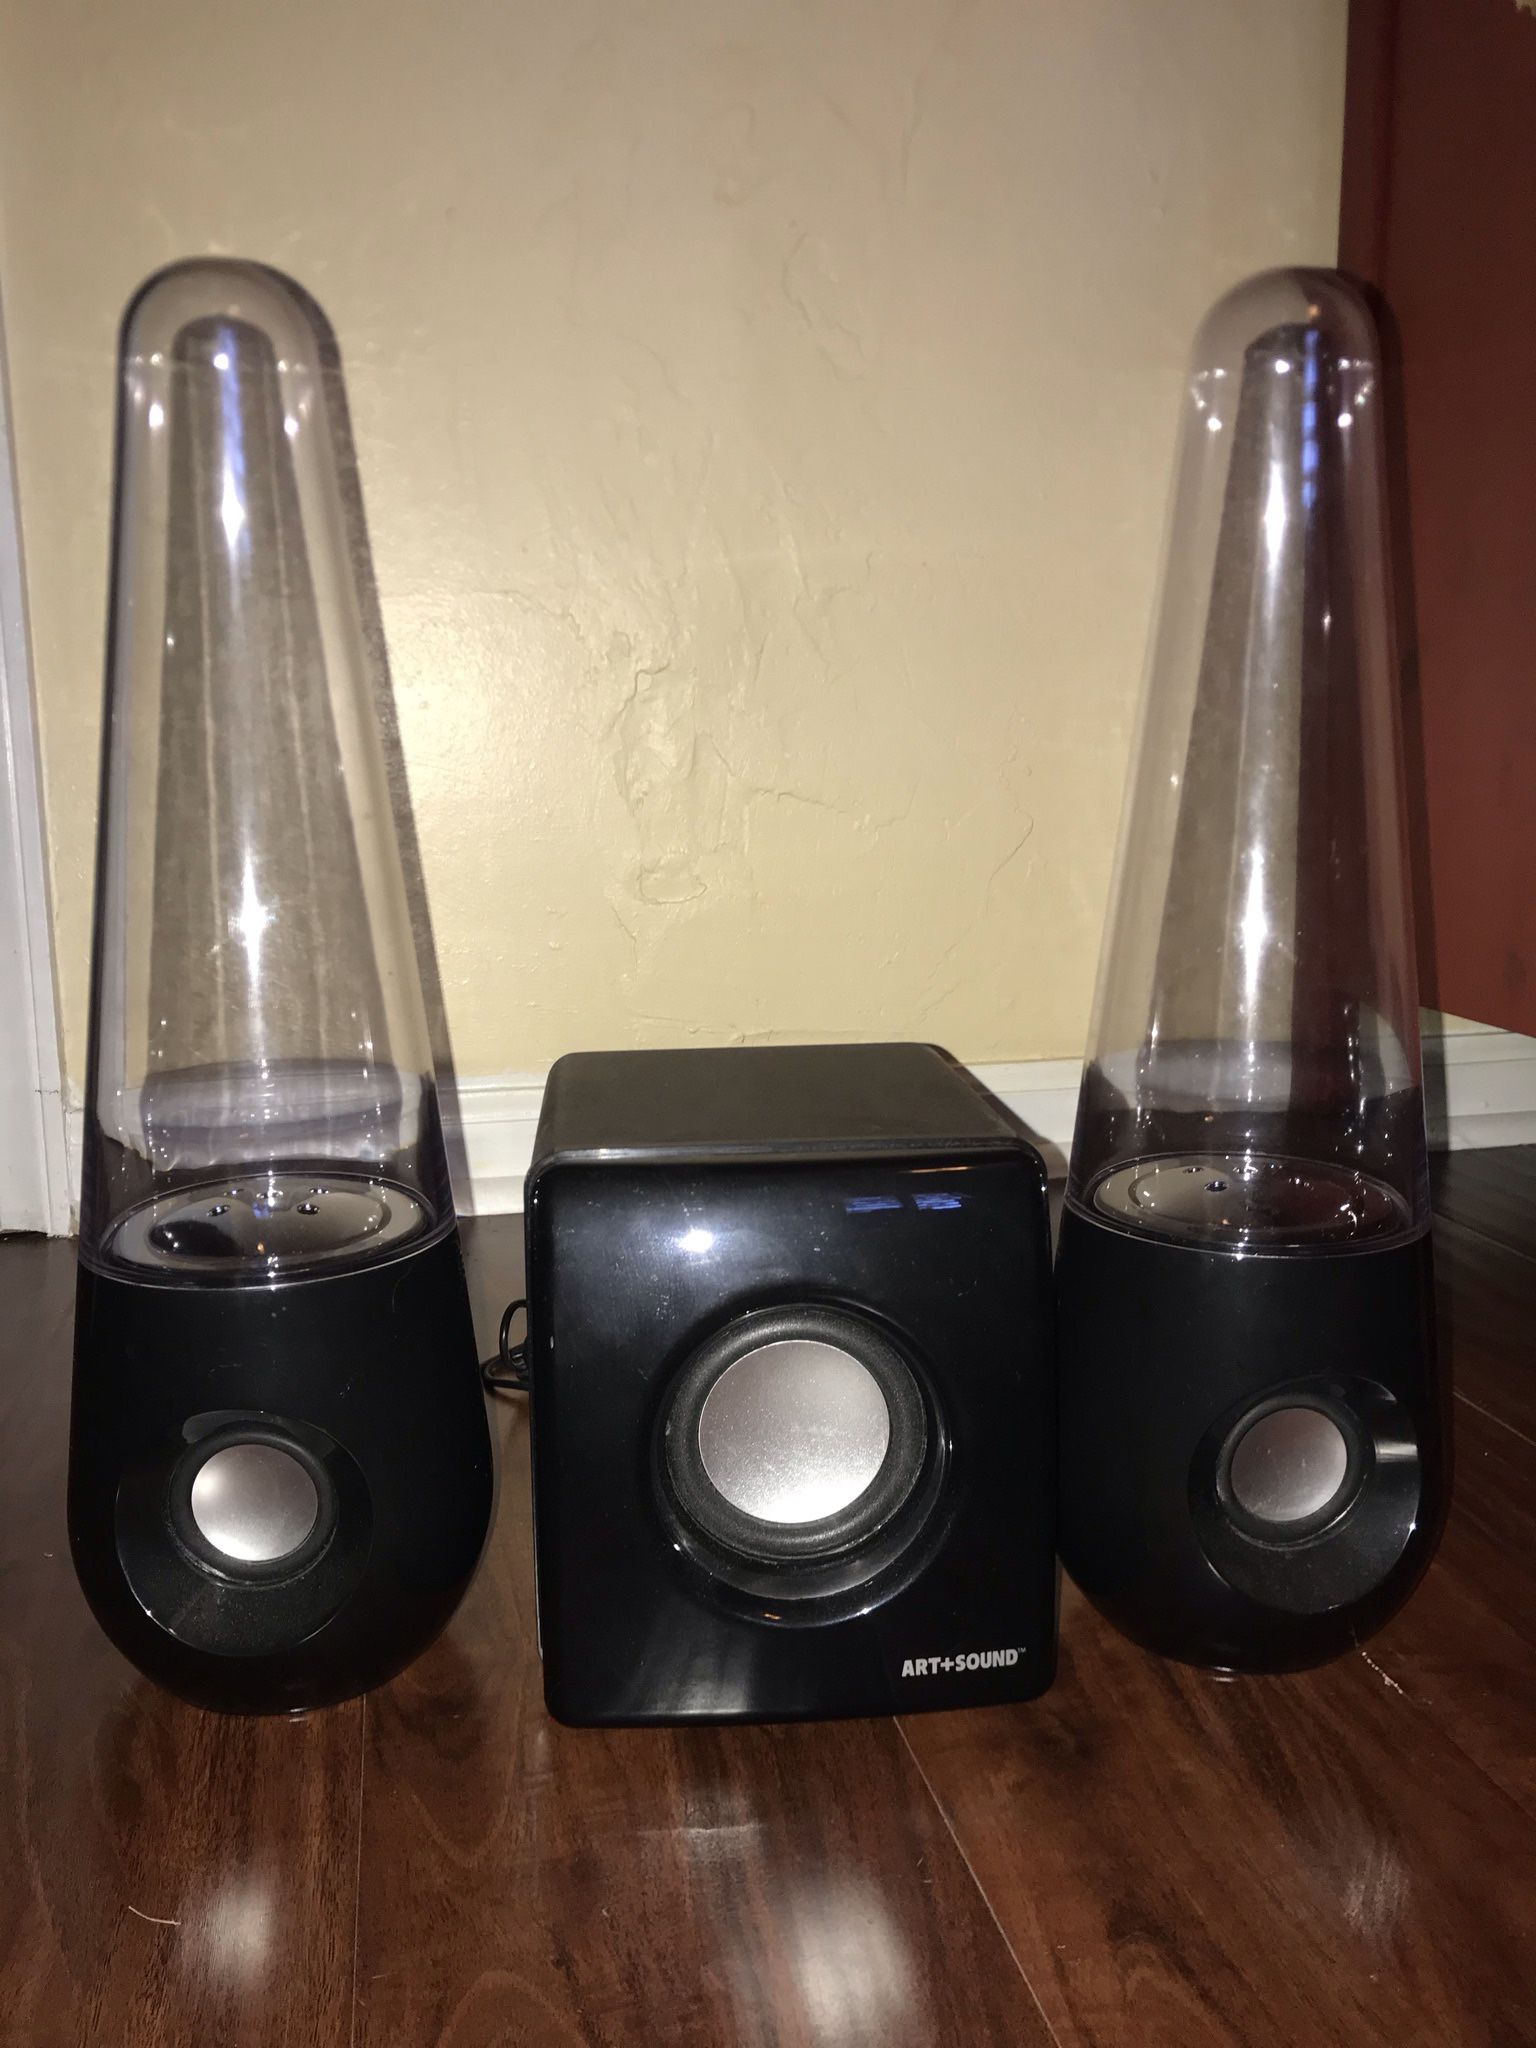 2 Water Speakers And Subwoofer!